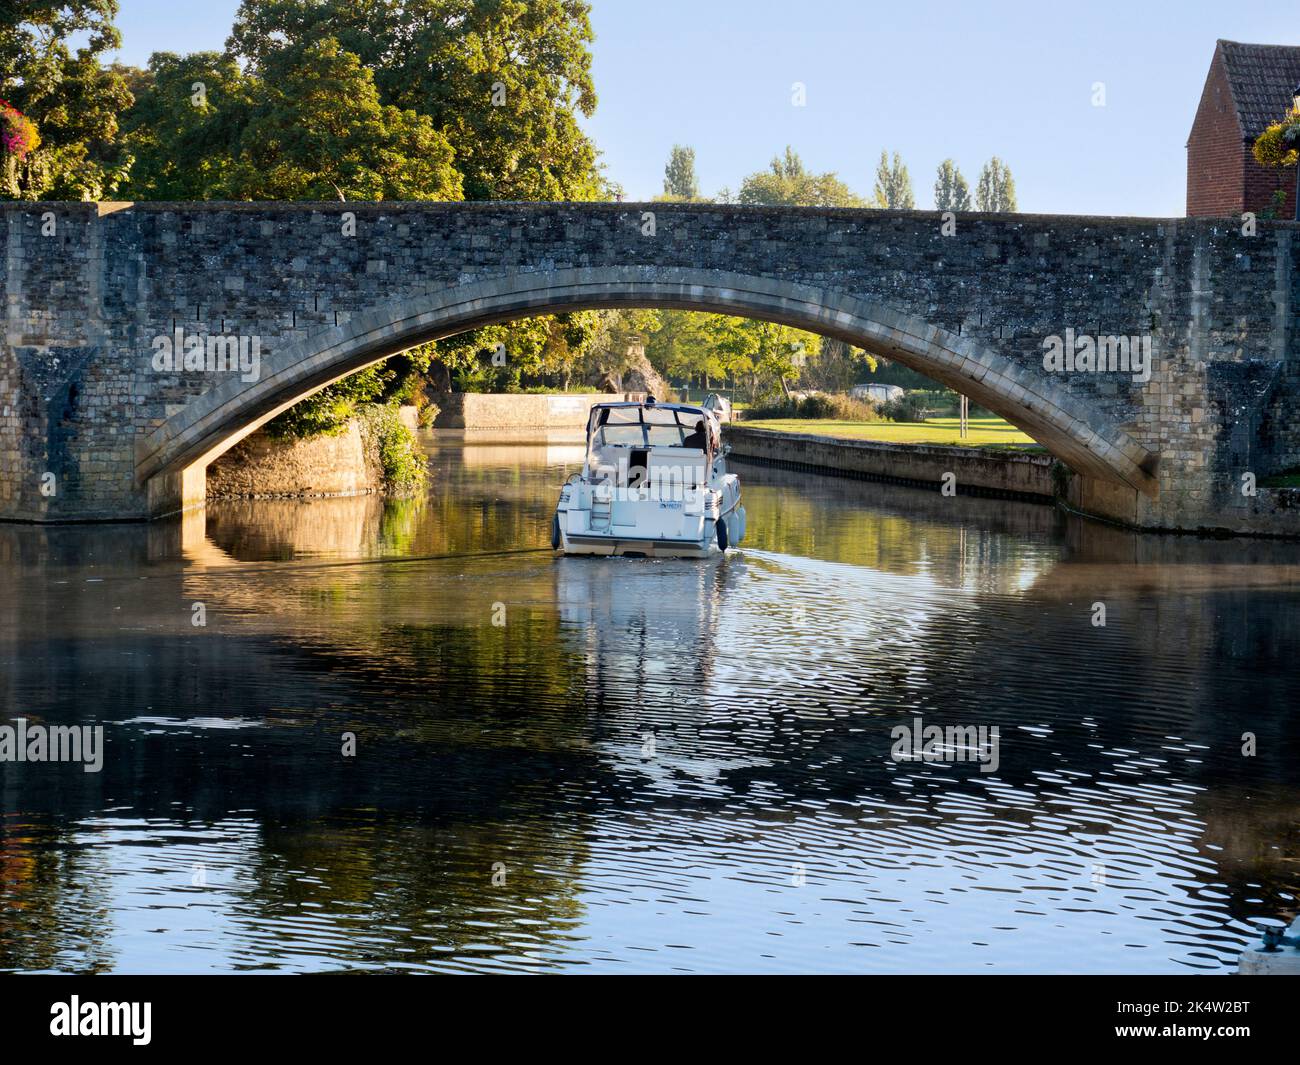 Abingdon claims to be the oldest town in England. And the Thames runs through the heart of it. Here we see the town's famous medieval stone bridge, on Stock Photo